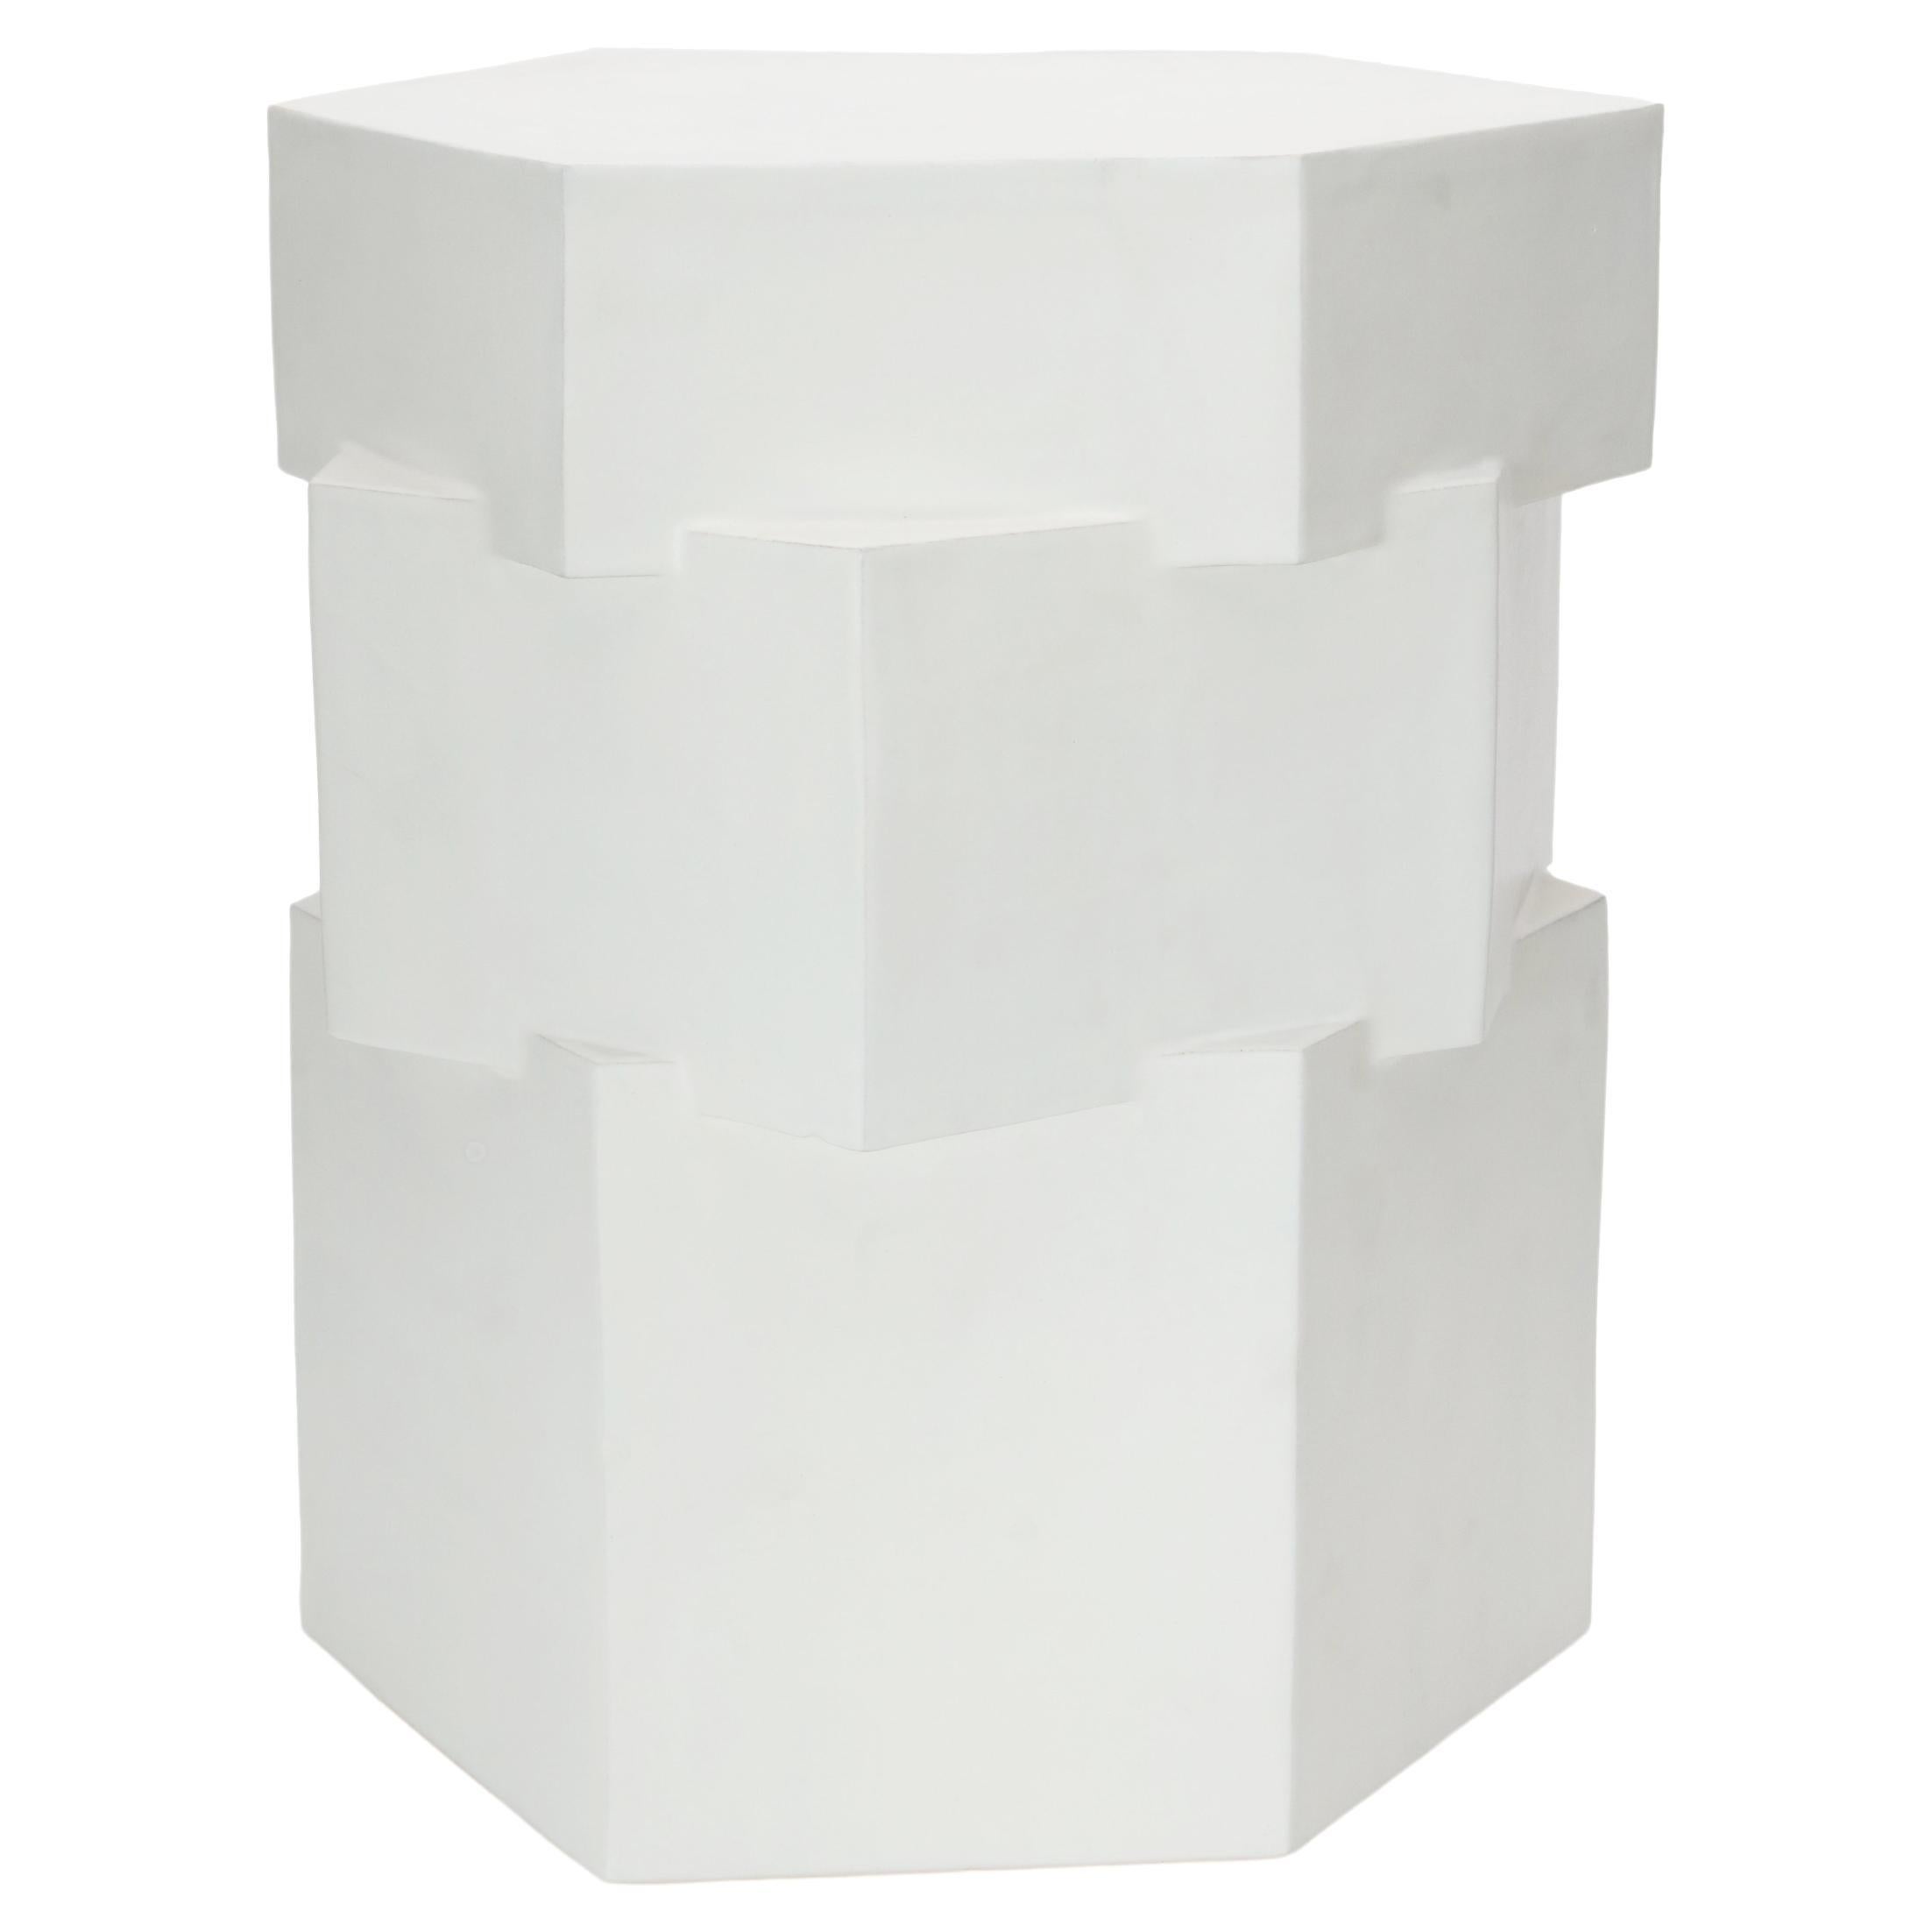 XL Tall Ceramic Hex Side Table & Stool in Marshmallow by BZIPPY For Sale